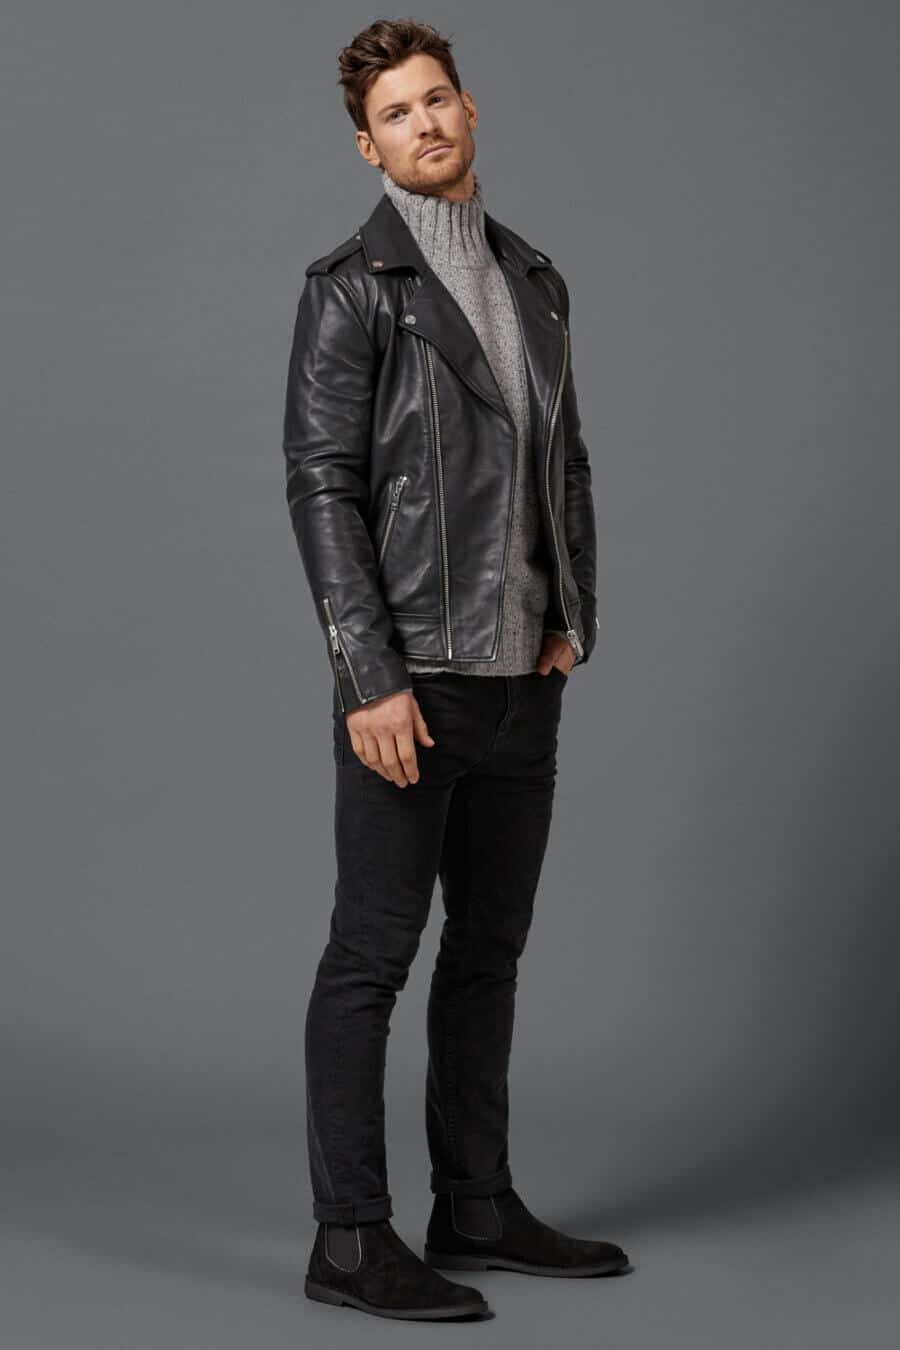 Men's black leather biker jacket, chunky grey turtleneck, black jeans and suede Chelsea boots outfit